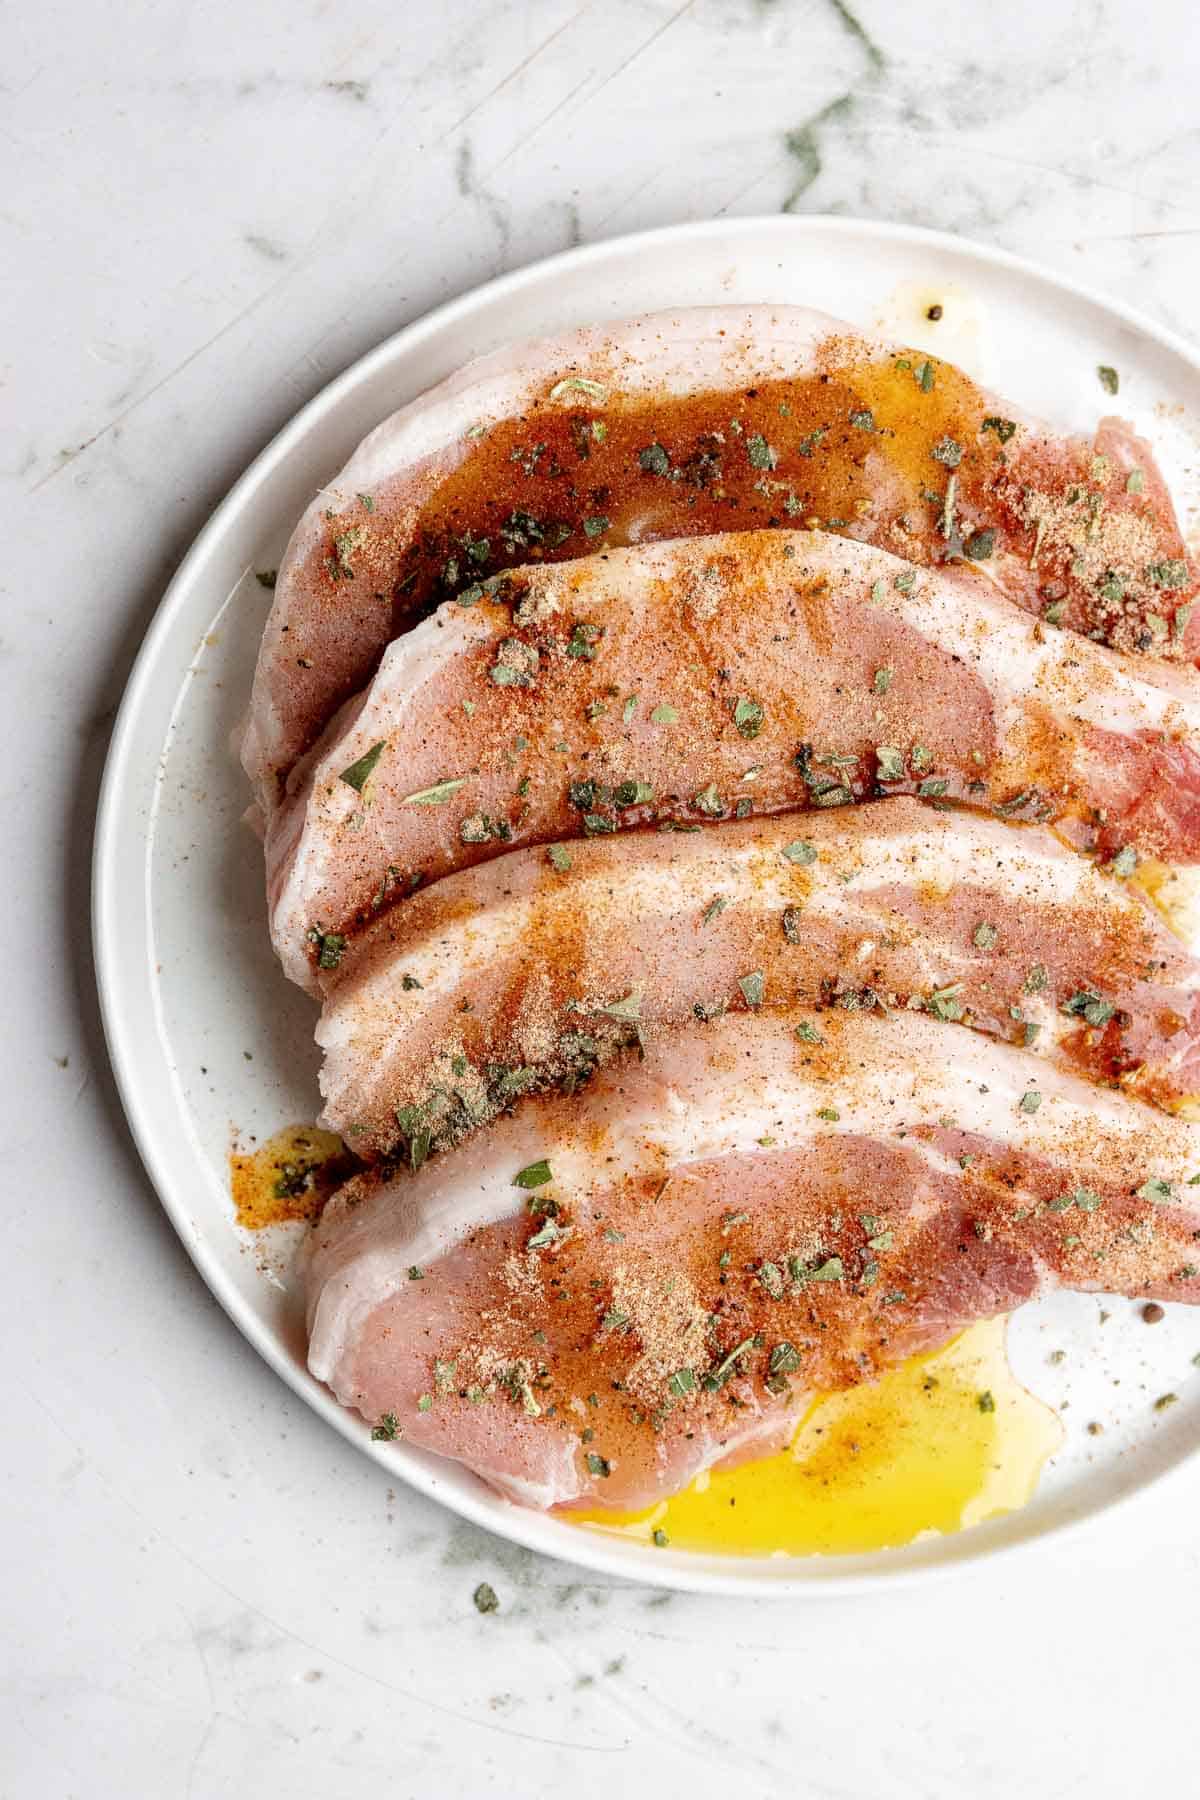 Pork chops with spices on a white plate.